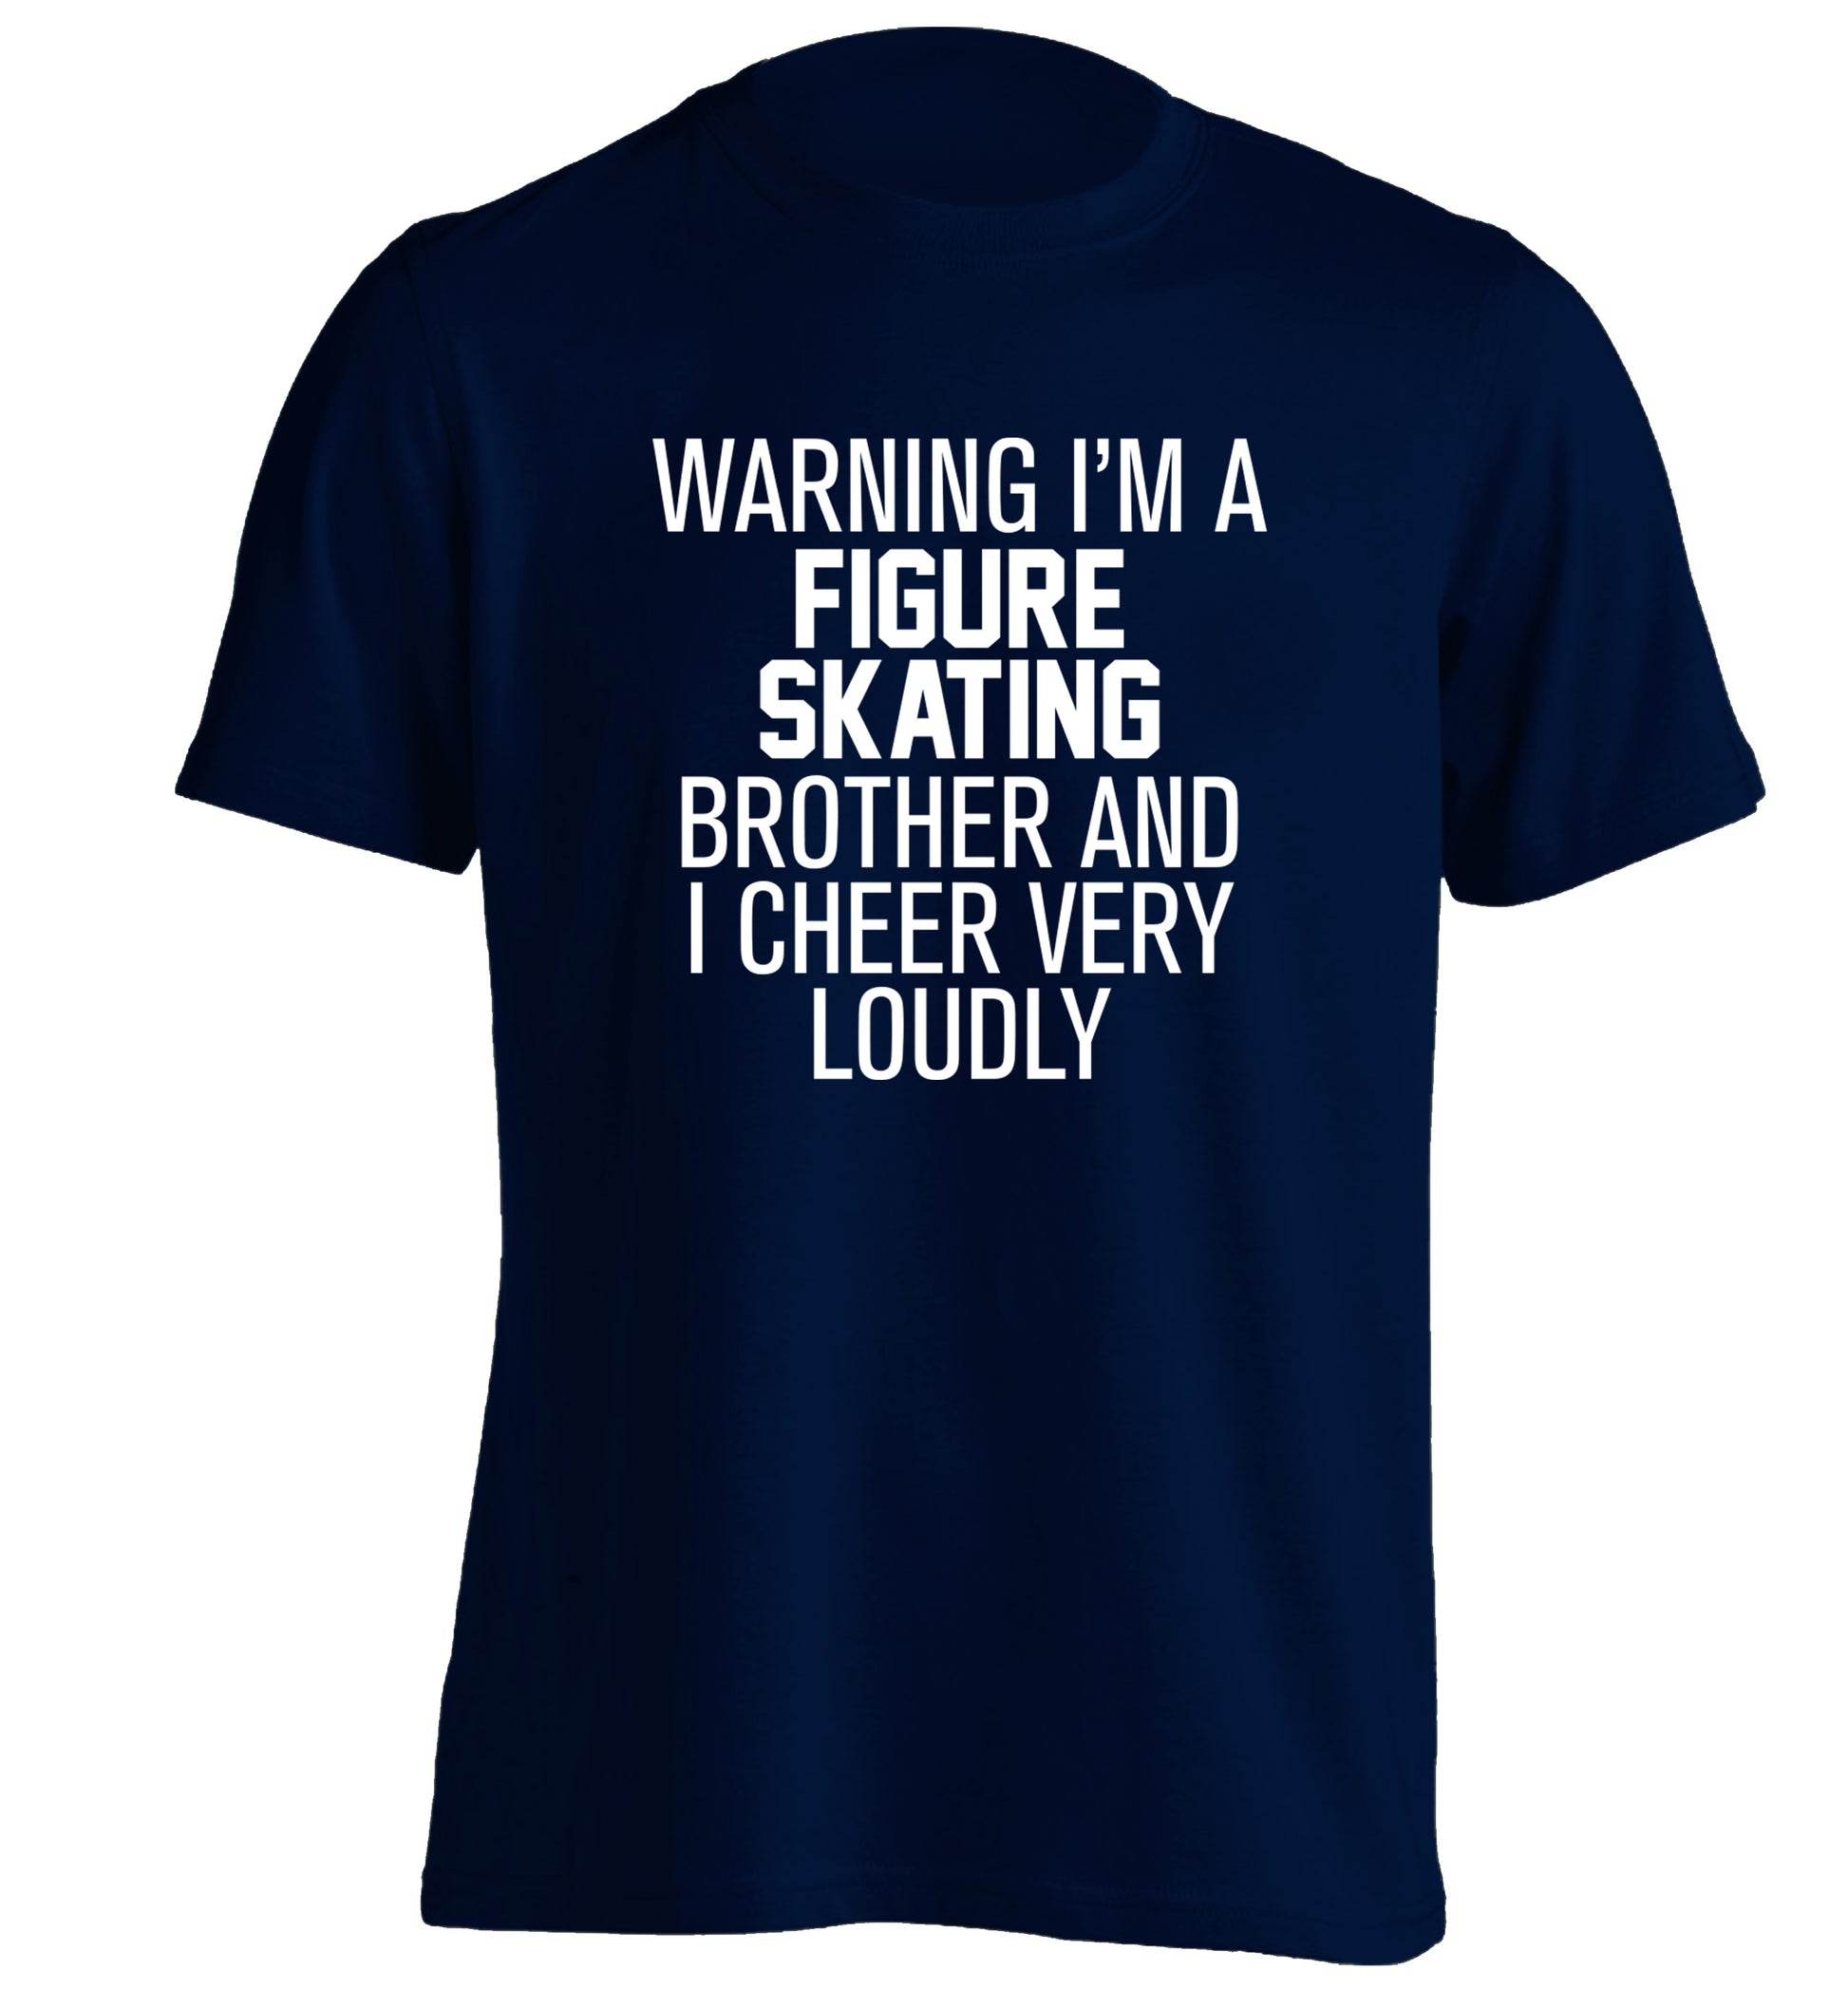 Warning I'm a figure skating brother and I cheer very loudly adults unisexnavy Tshirt 2XL